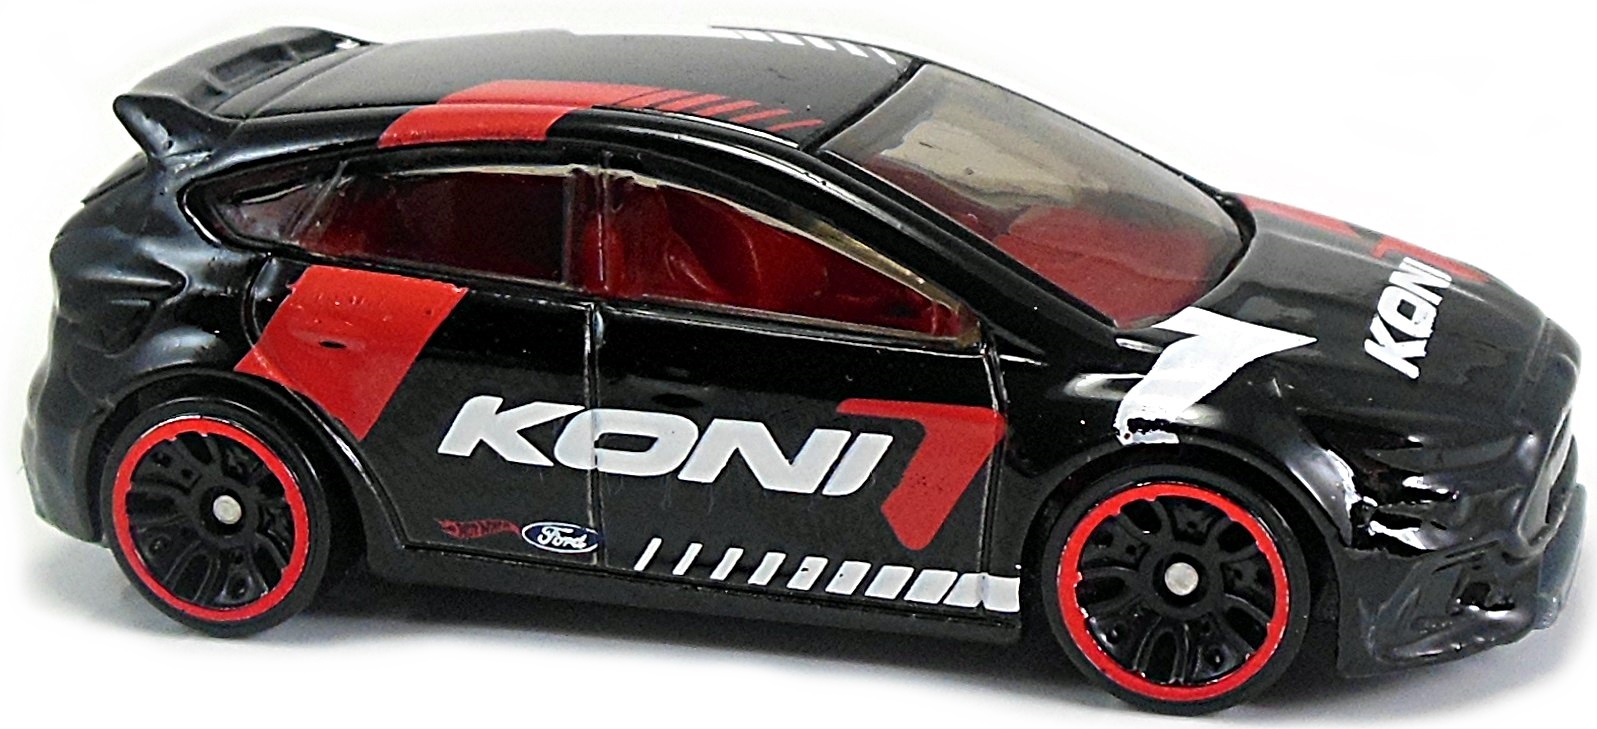 FORD FOCUS RS #176☆BLACK;white KONI;red☆Speed Graphic☆2017 i Hot Wheels case H/J 